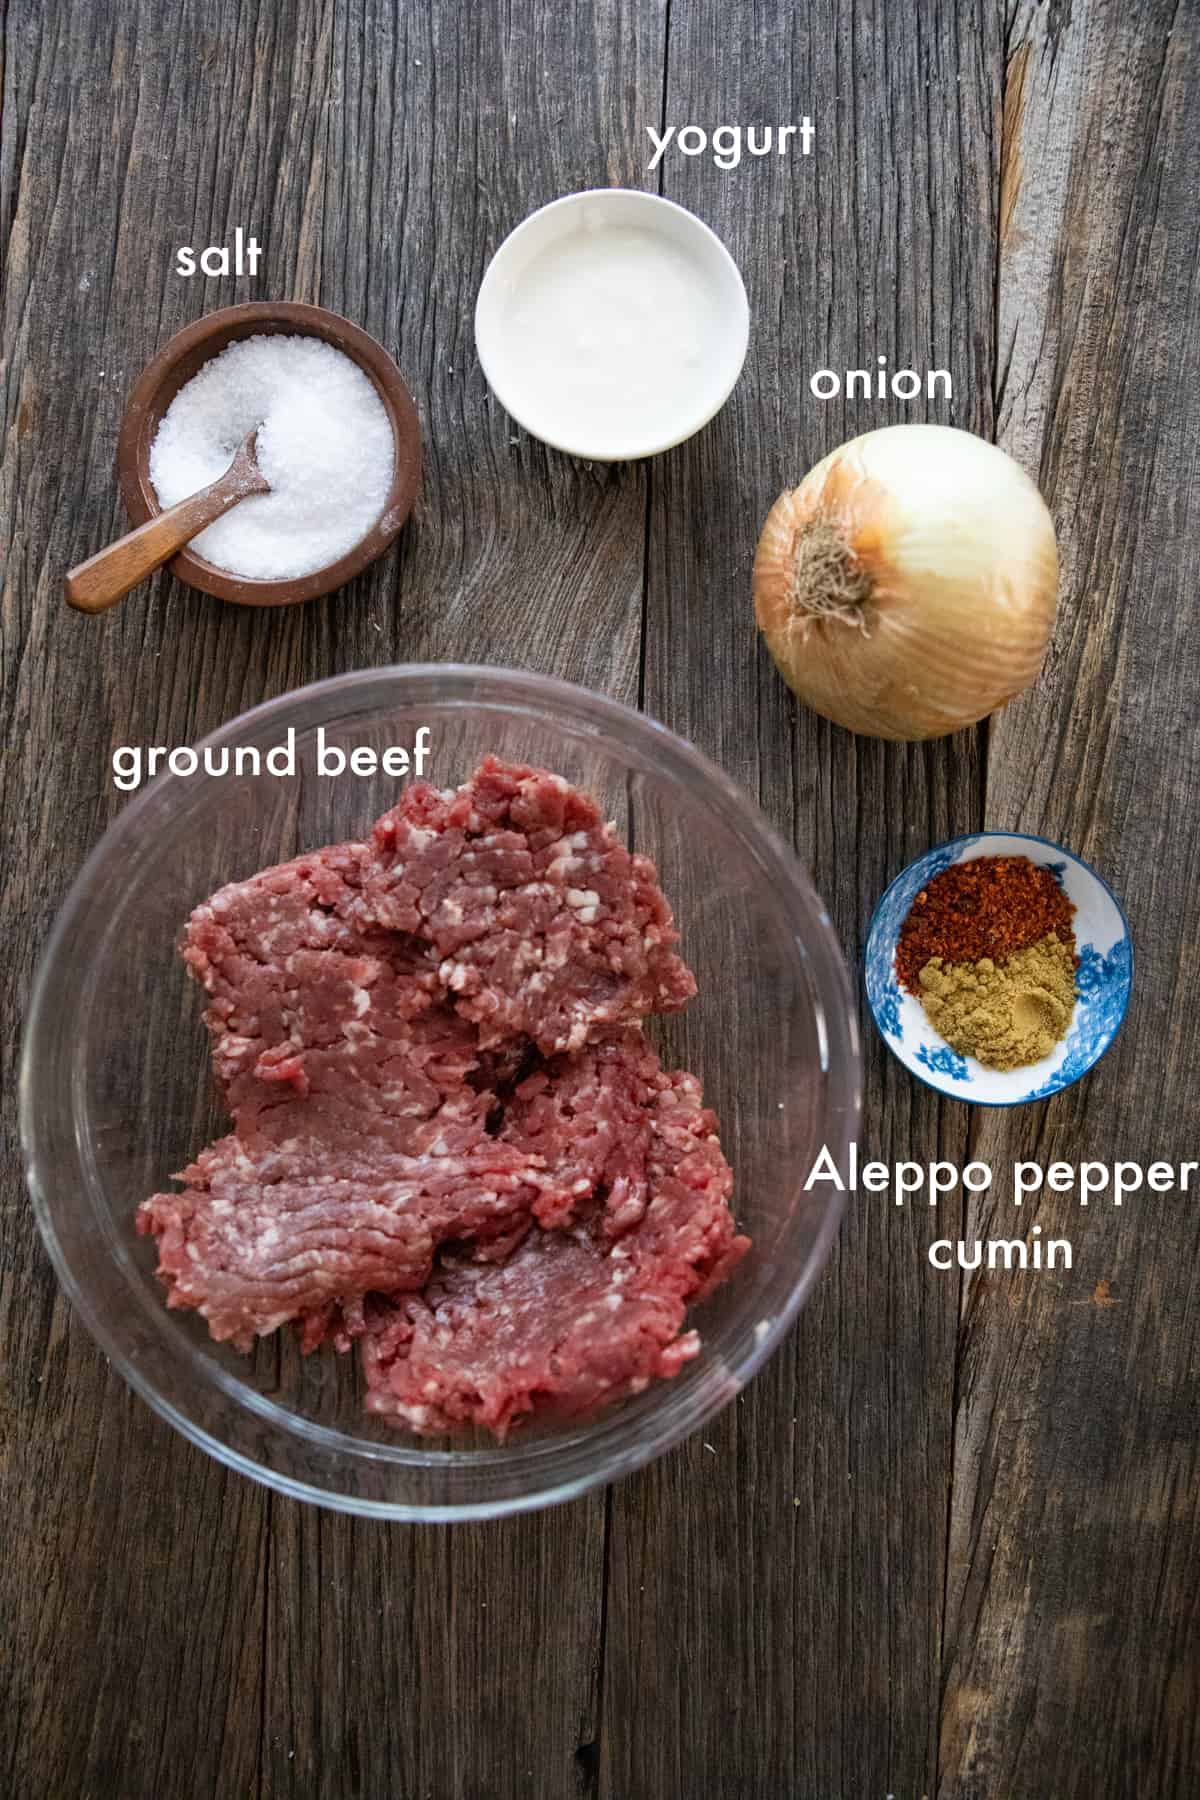 To make this recipe you need onion, ground beef, spices and yogurt. 